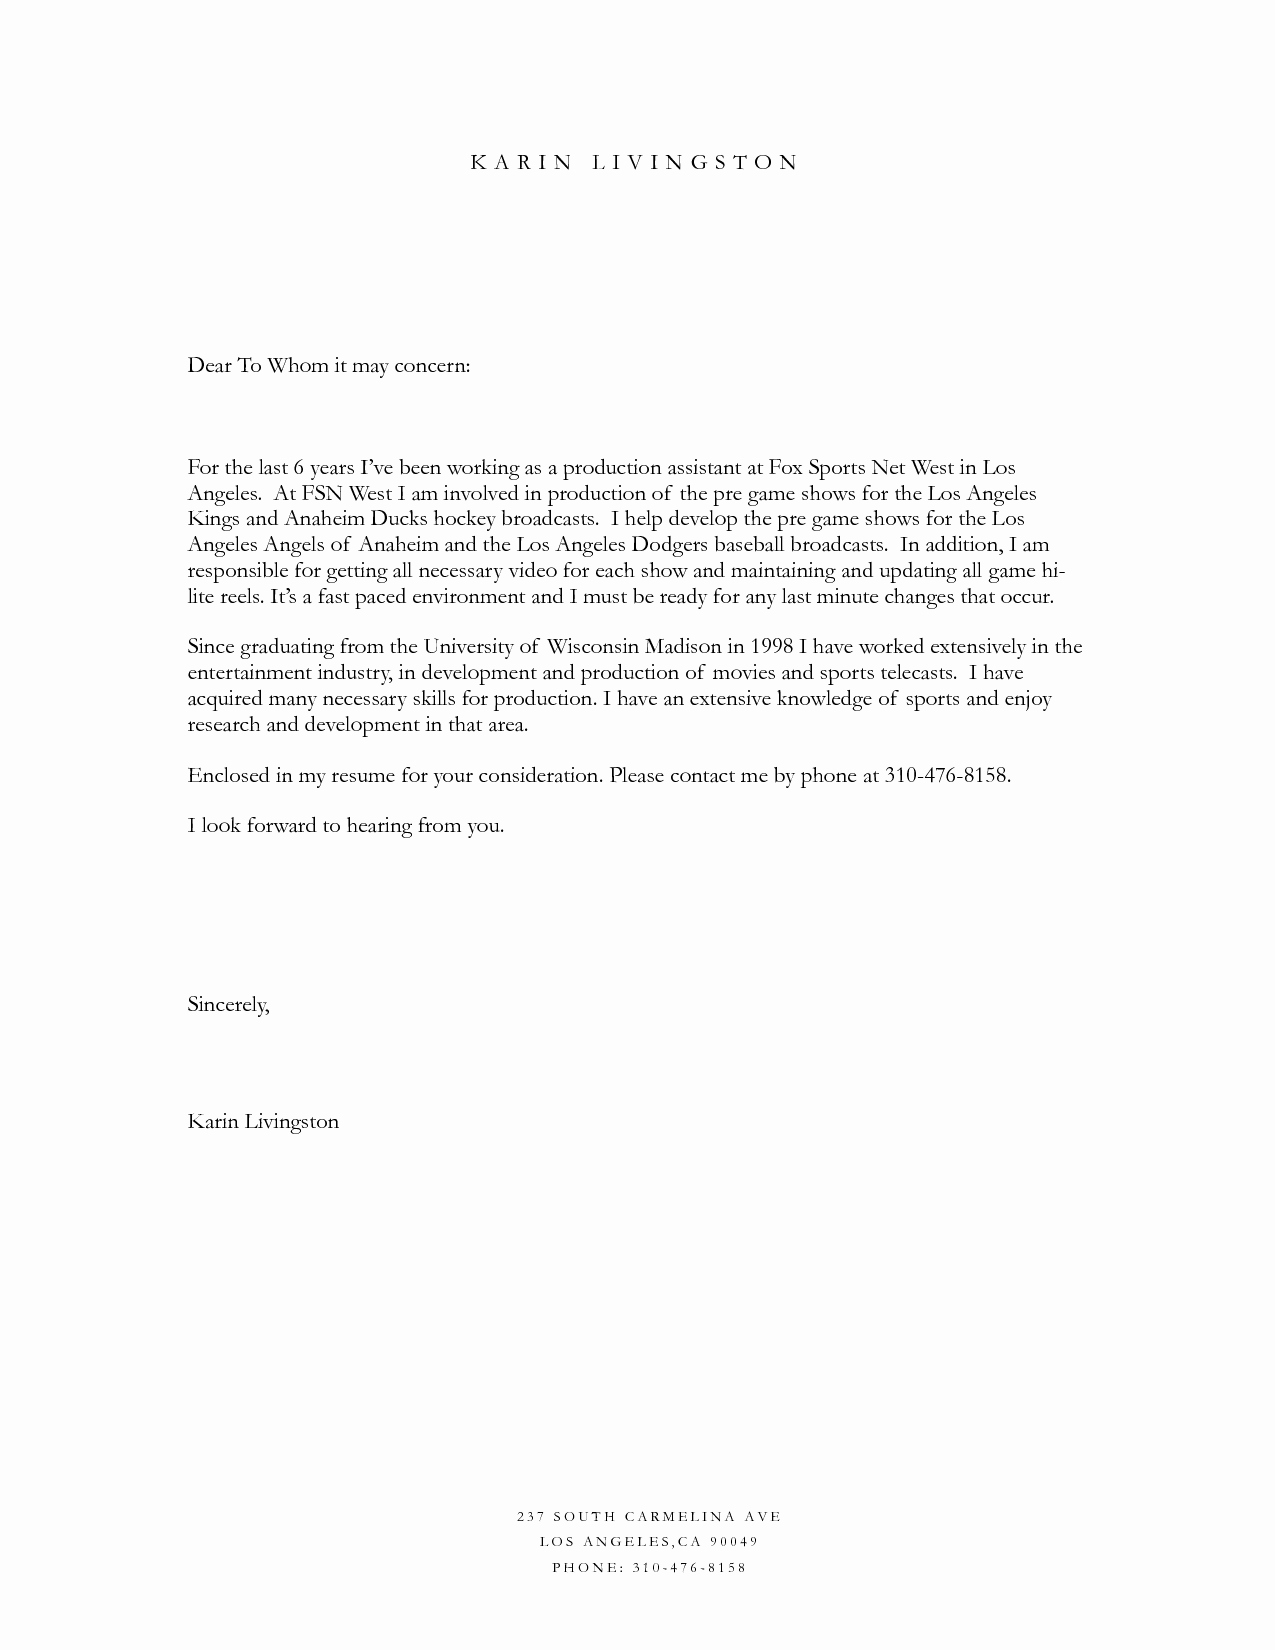 Concerned Letter Sample Unique to whom It May Concern Cover Letter